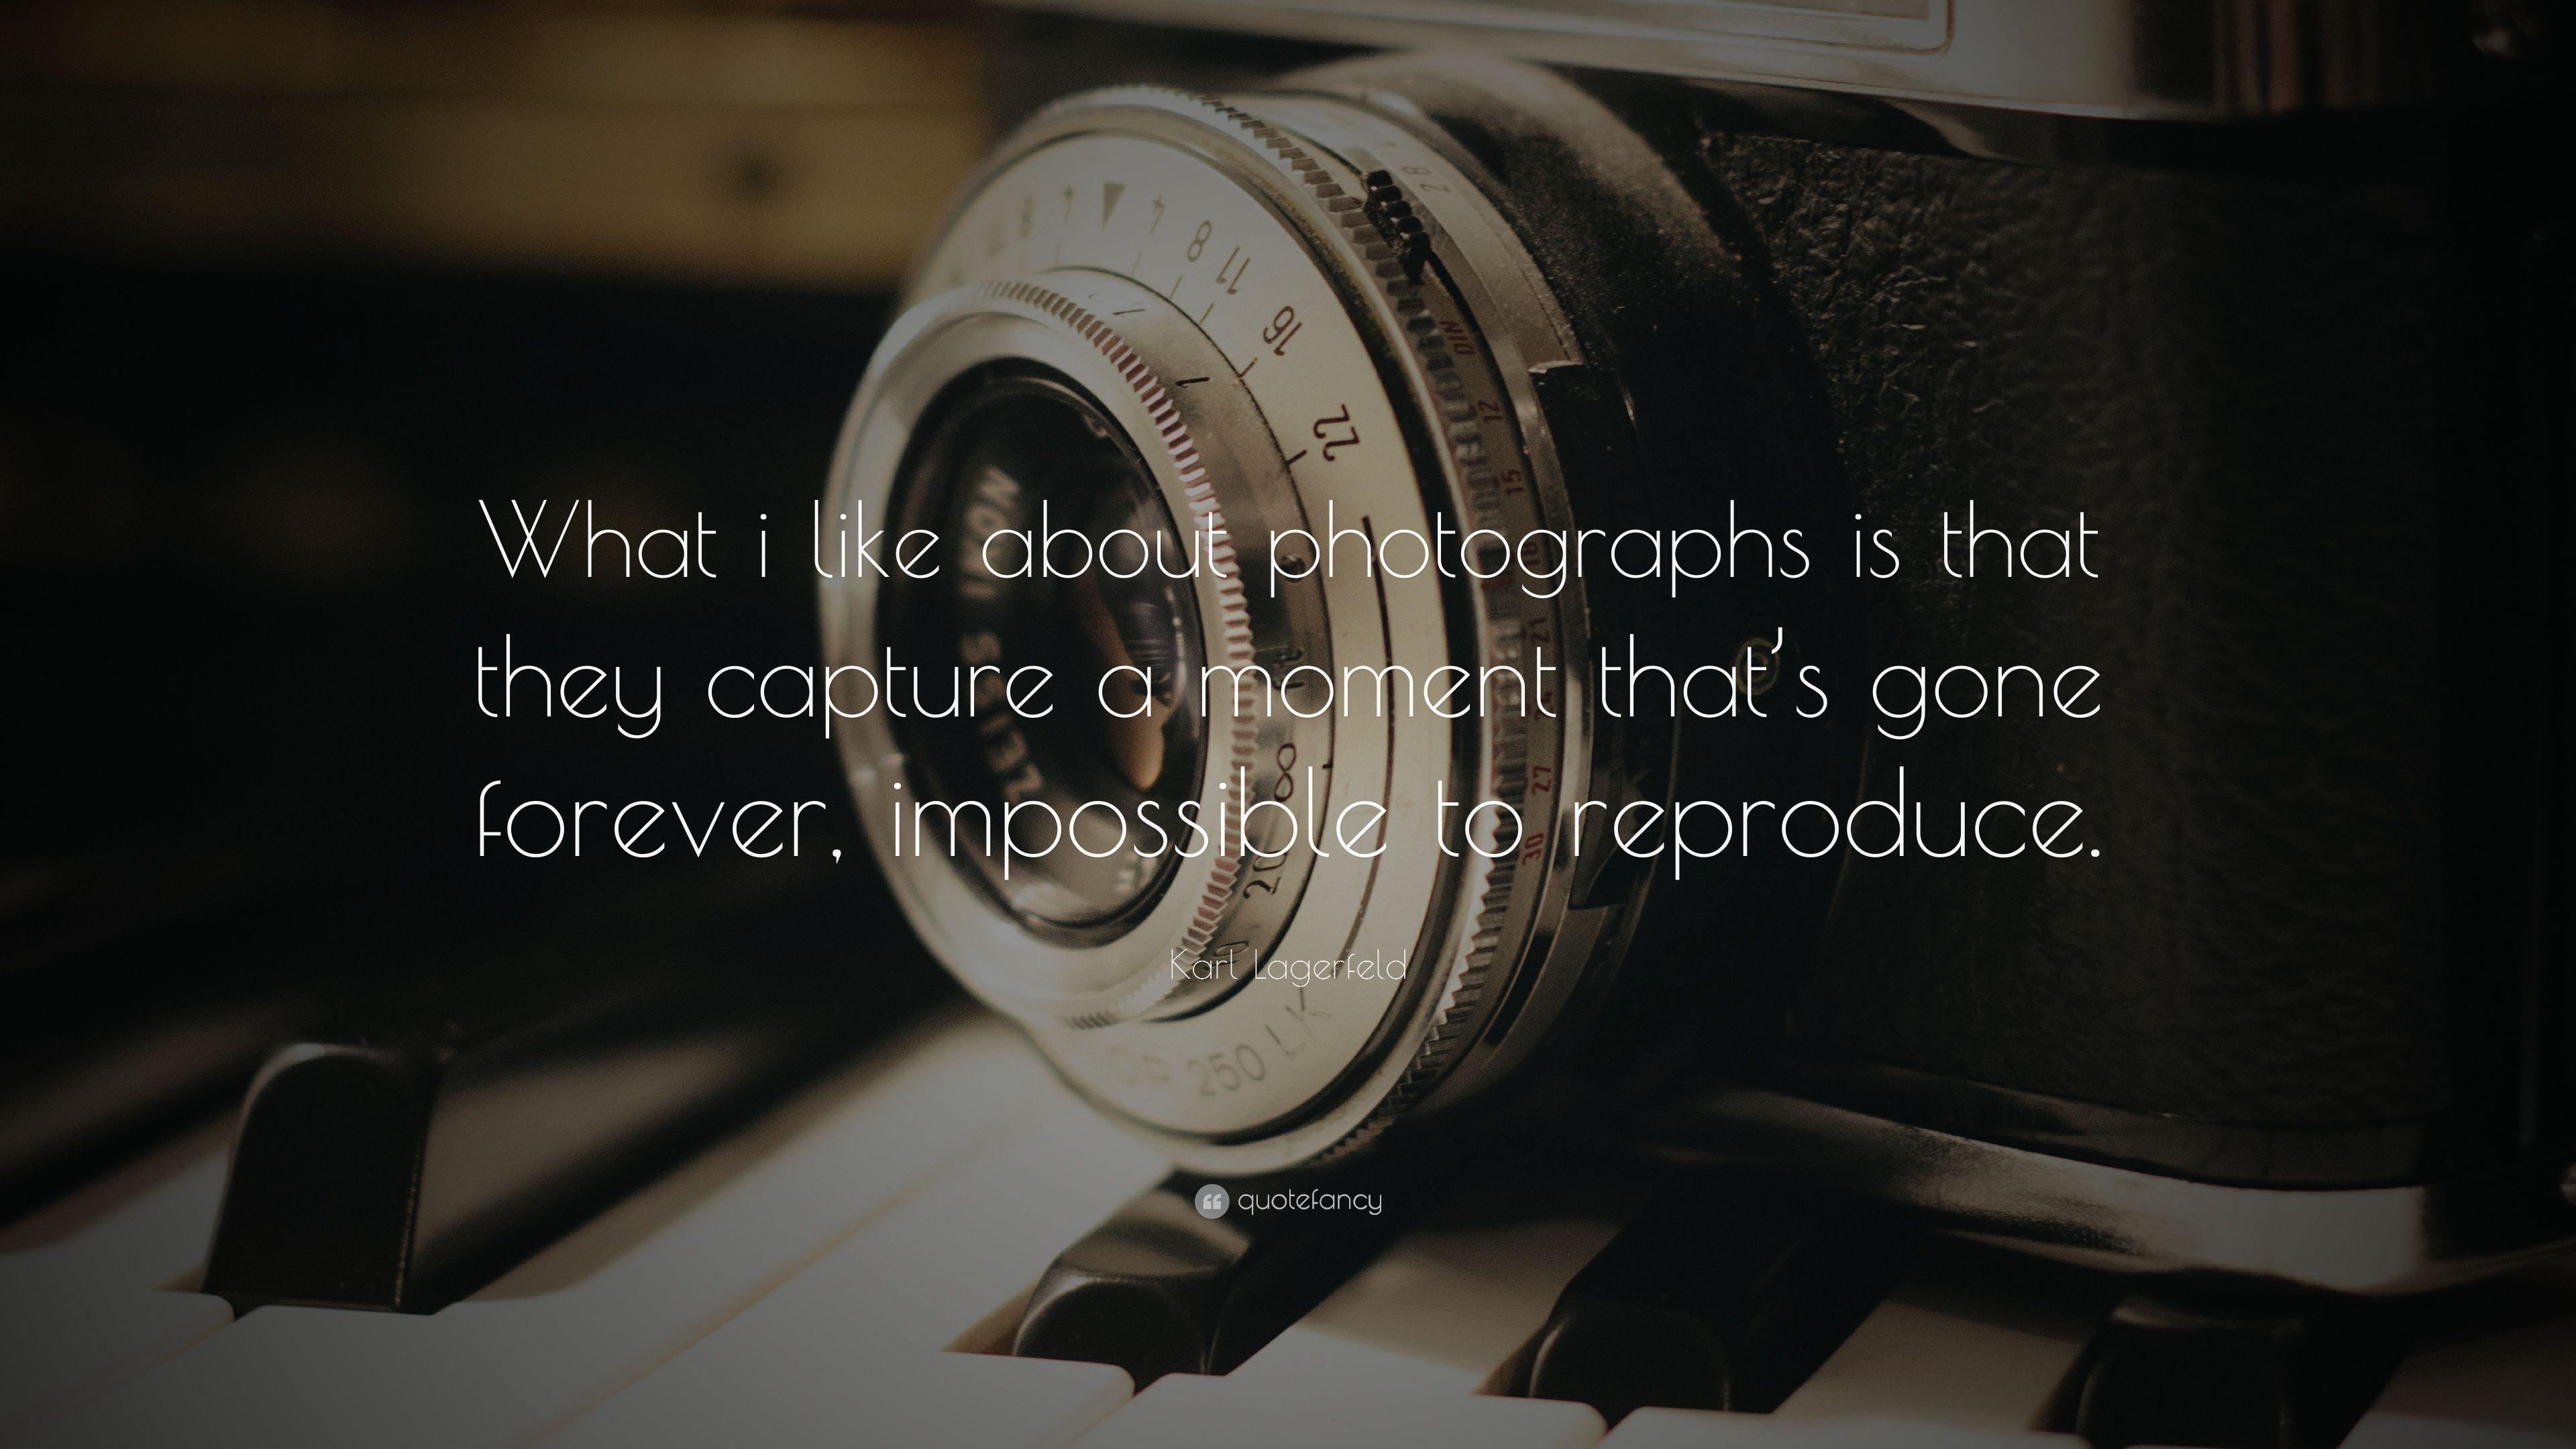 Karl Lagerfeld Quote: “What i like about photographs is that they capture a moment that's gone forever, impossible to reproduce.” (17 wallpaper)